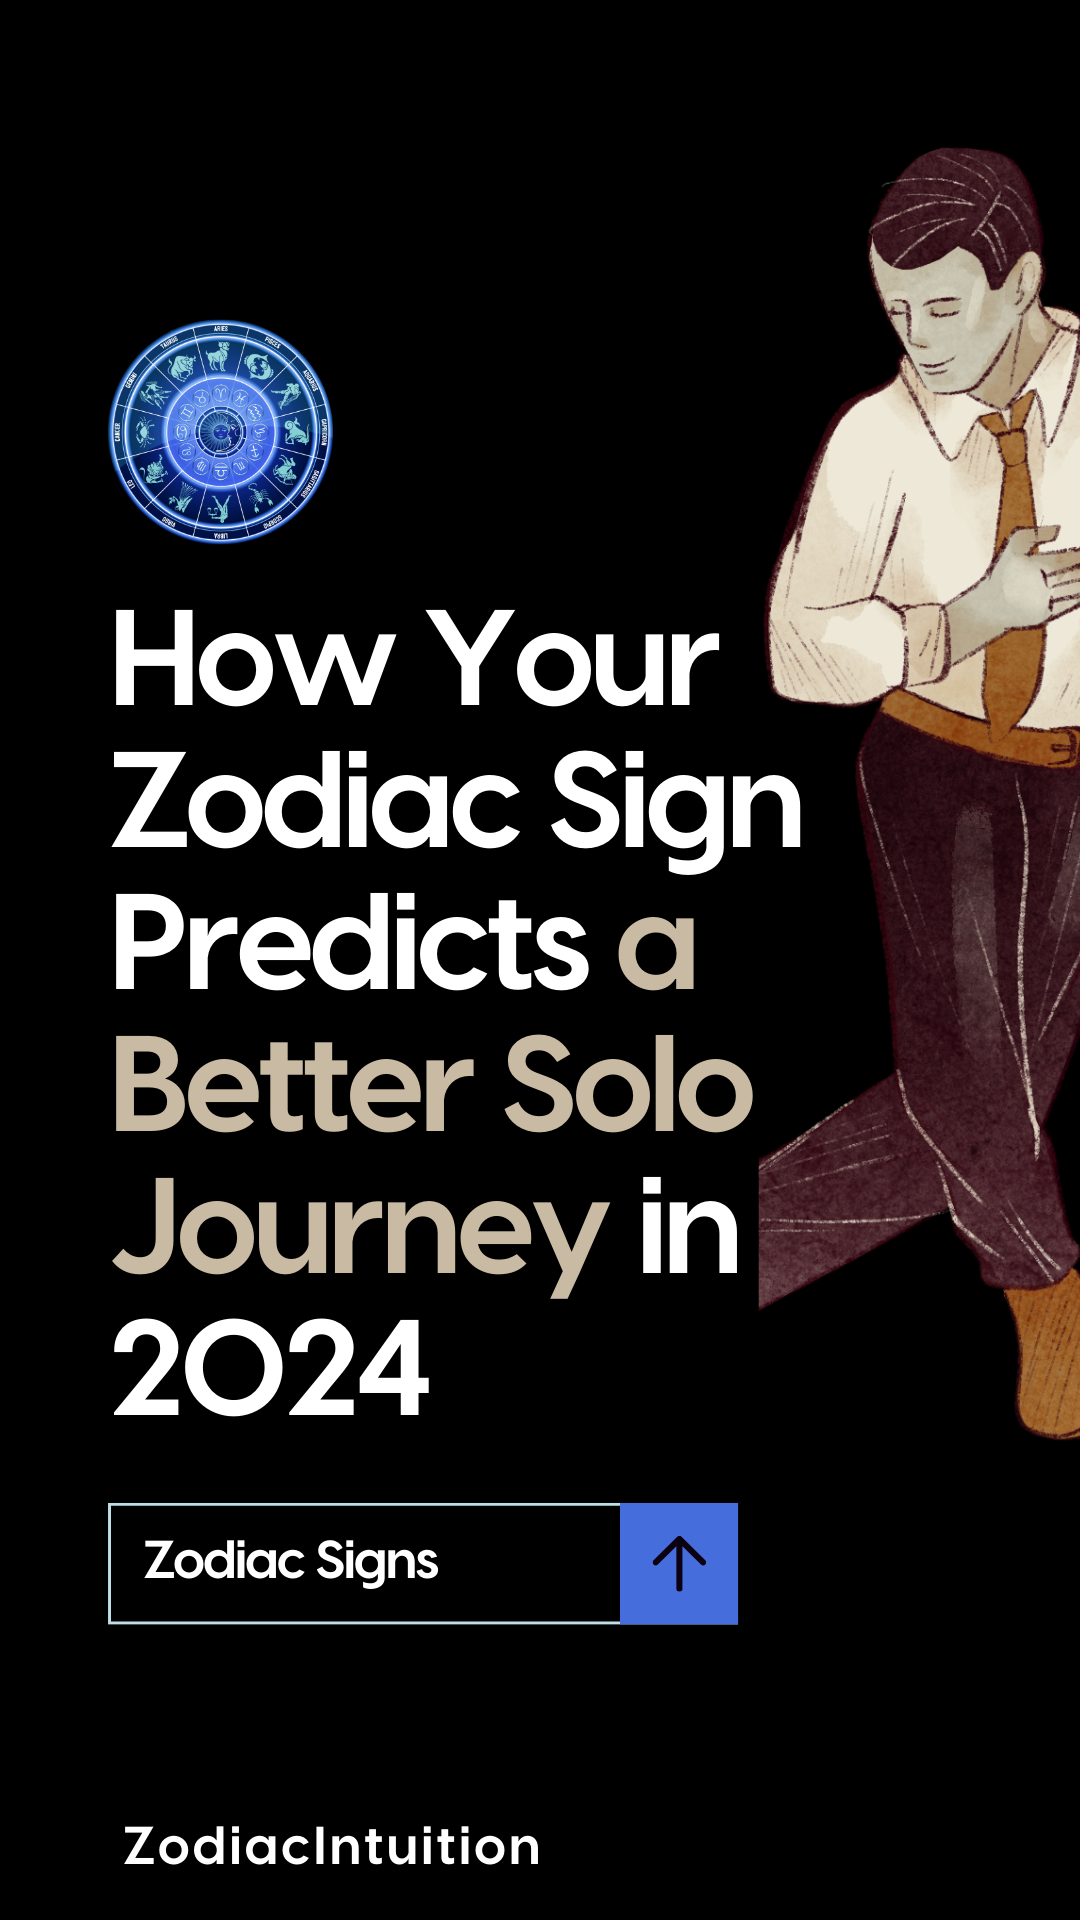 How Your Zodiac Sign Predicts a Better Solo Journey in 2024